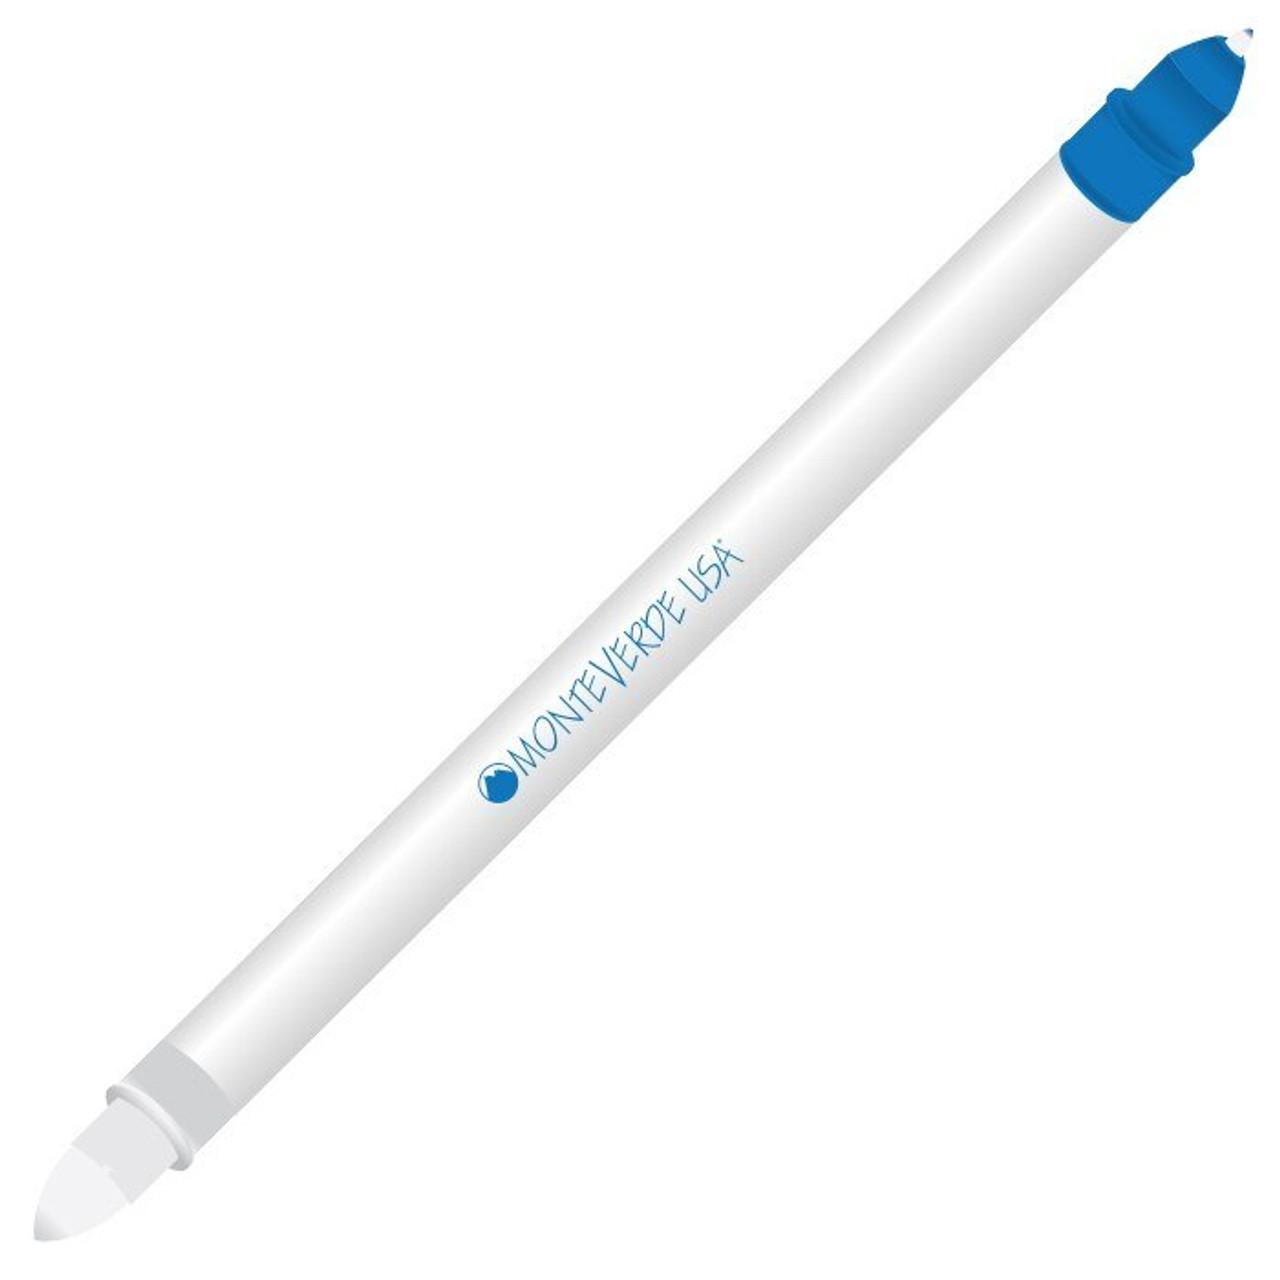 Chacopen Blue with Eraser (Water Erasable) – Home